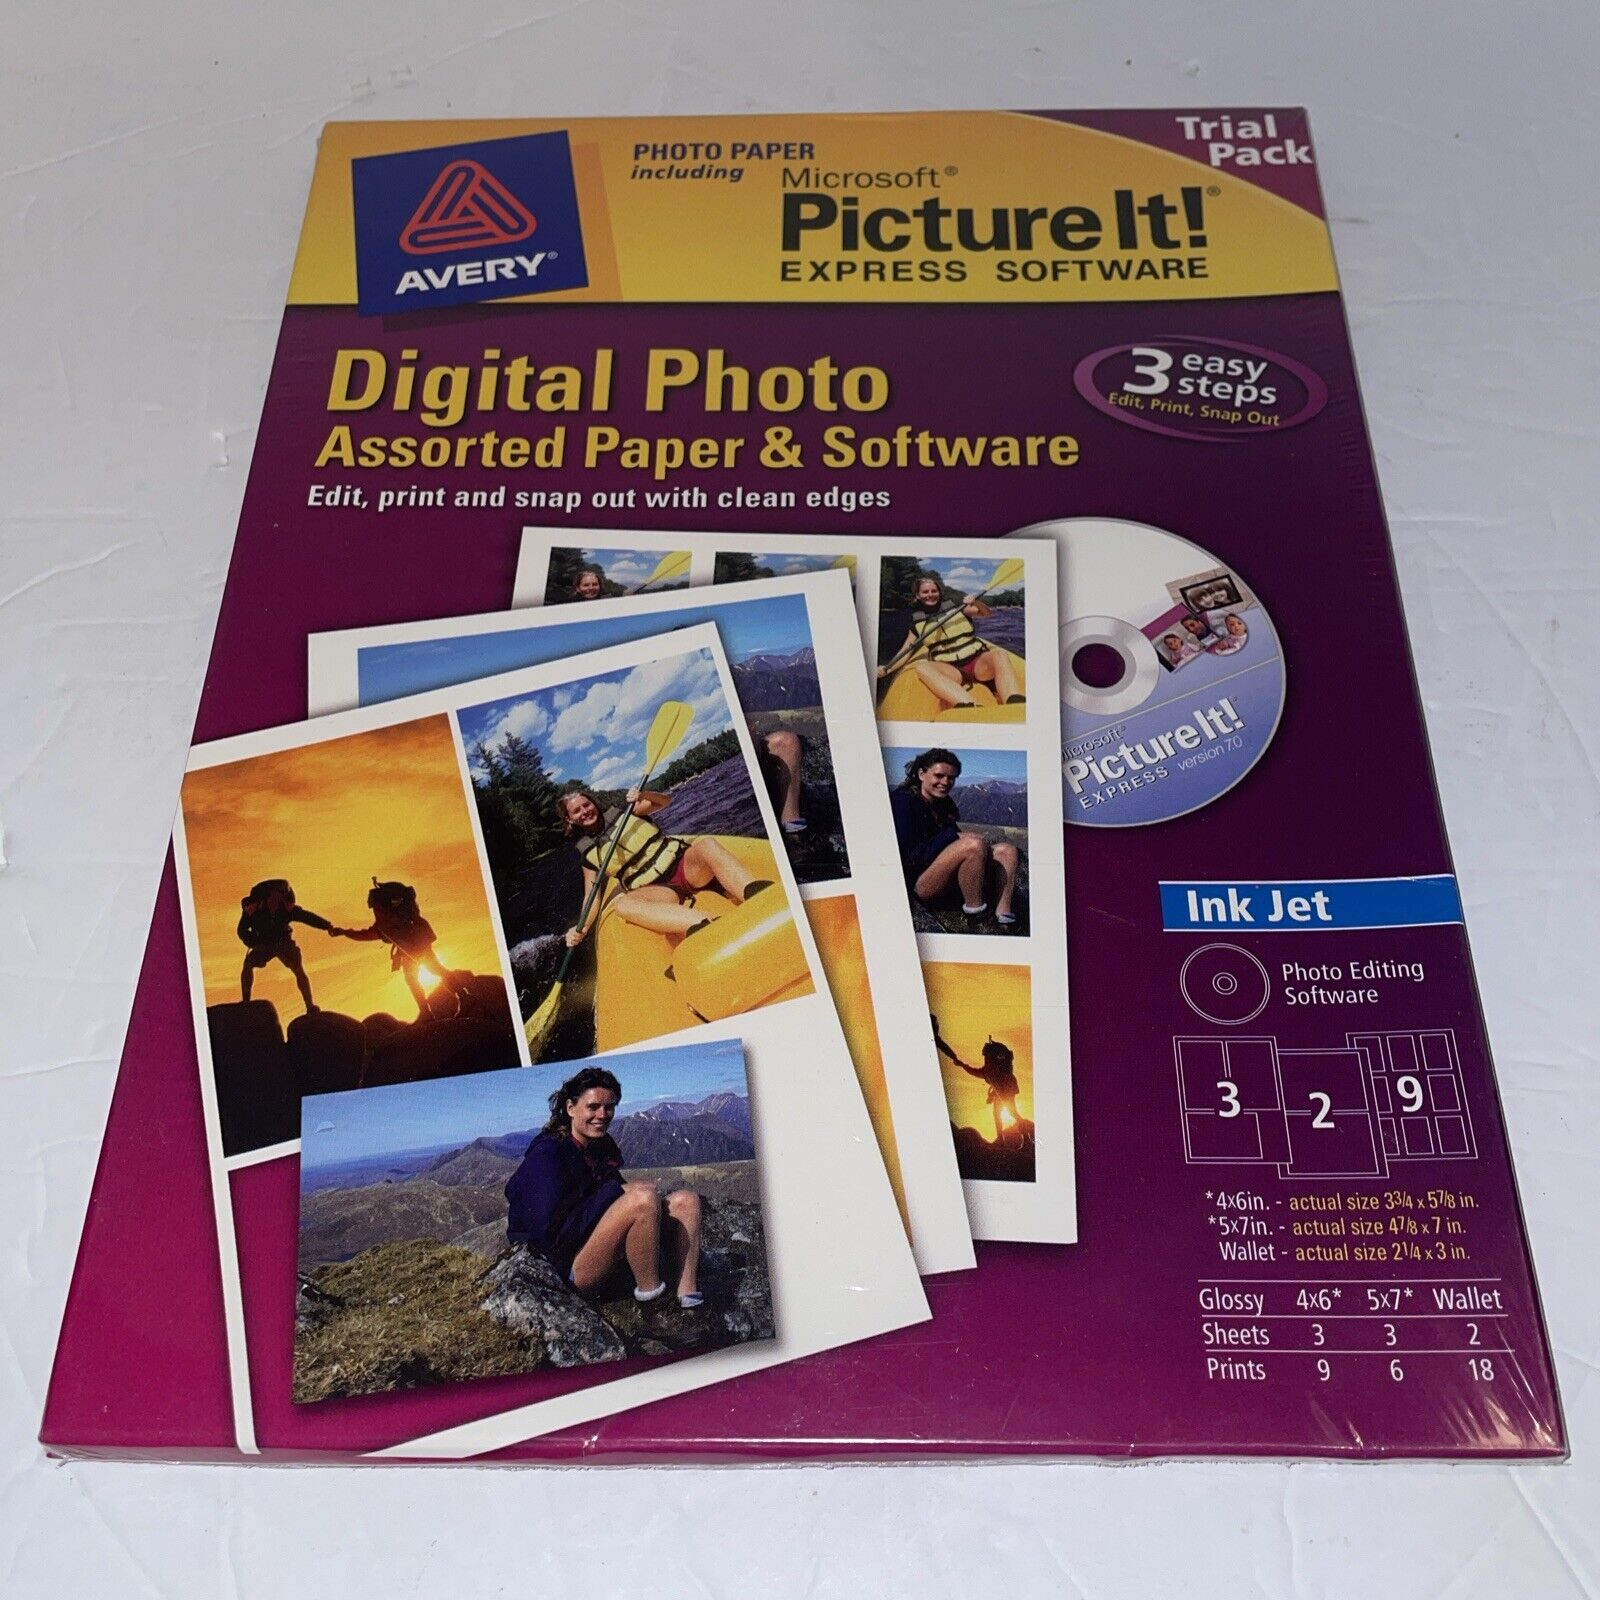 Avery Digital Photo Assorted Paper & Software (Microsoft Picture It) Trial Pack